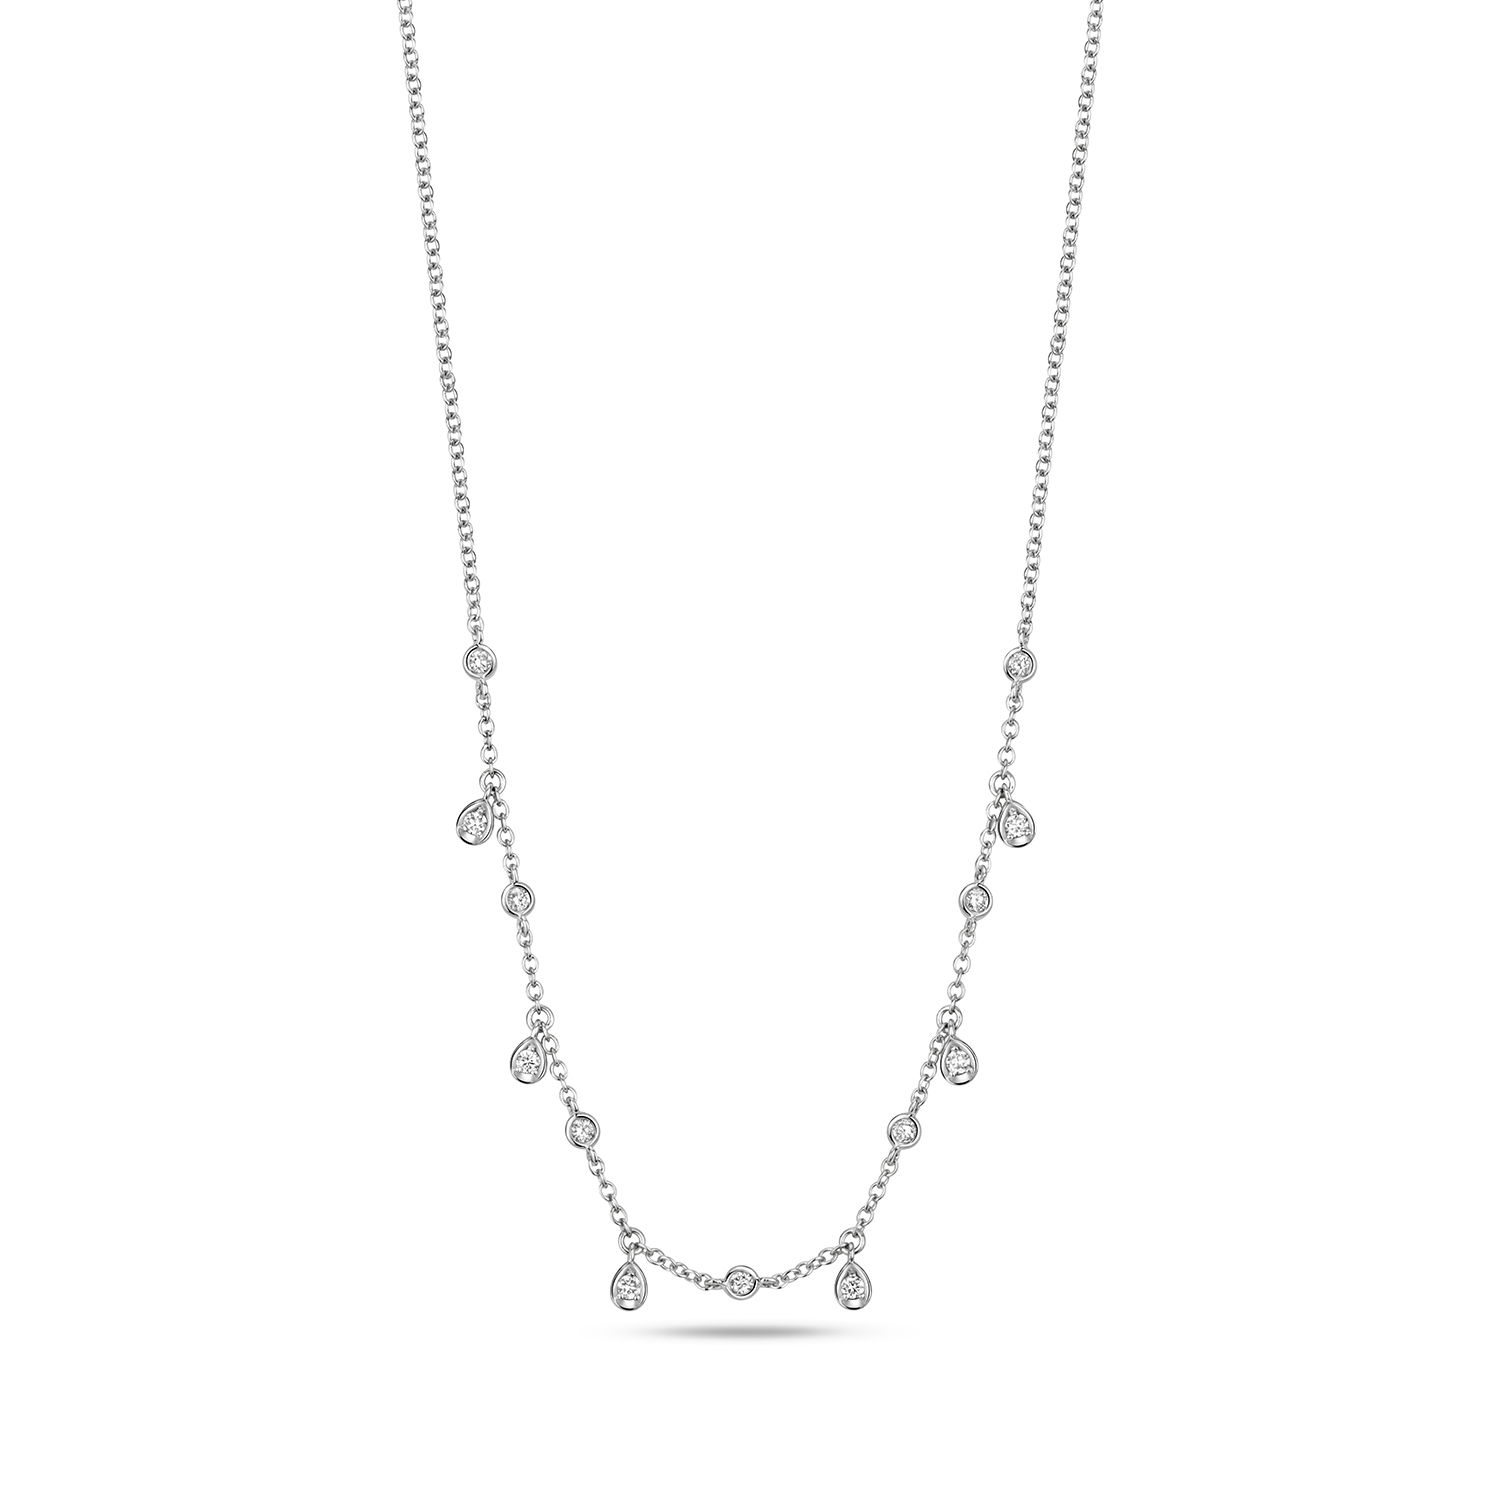 18ct White Gold Pear Shaped Necklet - Northumberland Goldsmiths